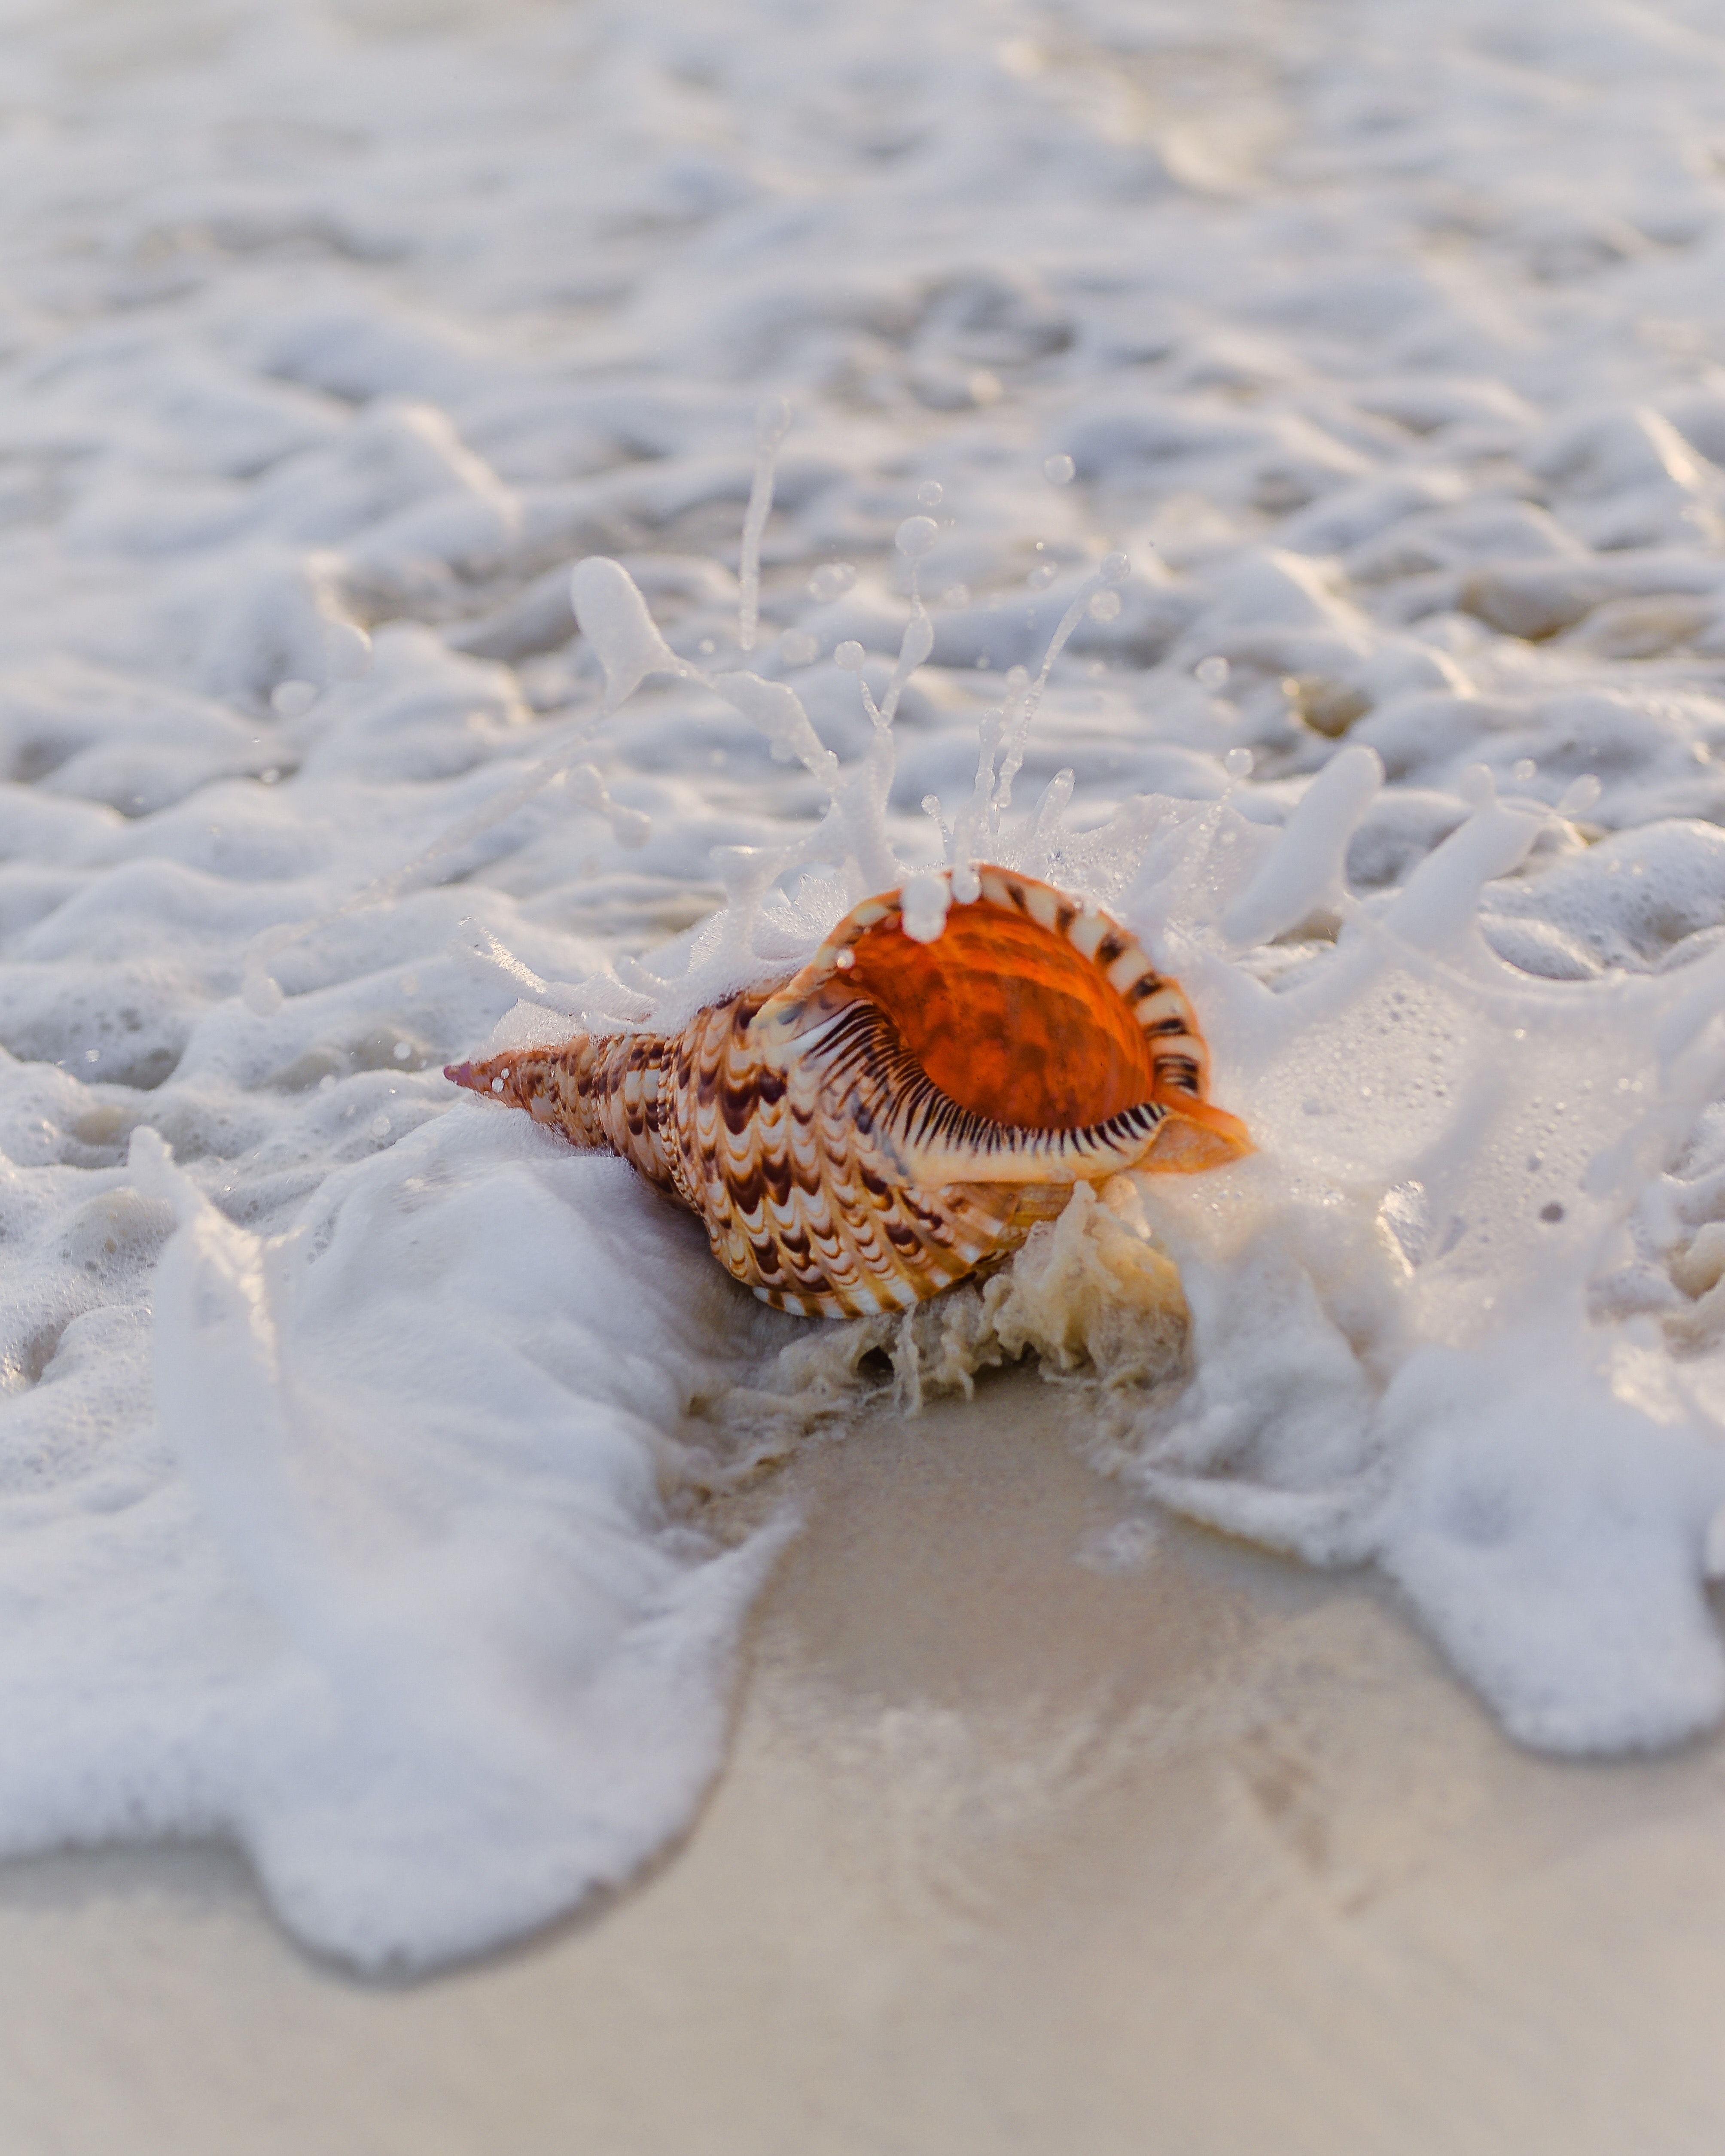 71799 download wallpaper sand, macro, foam, surf, shell screensavers and pictures for free